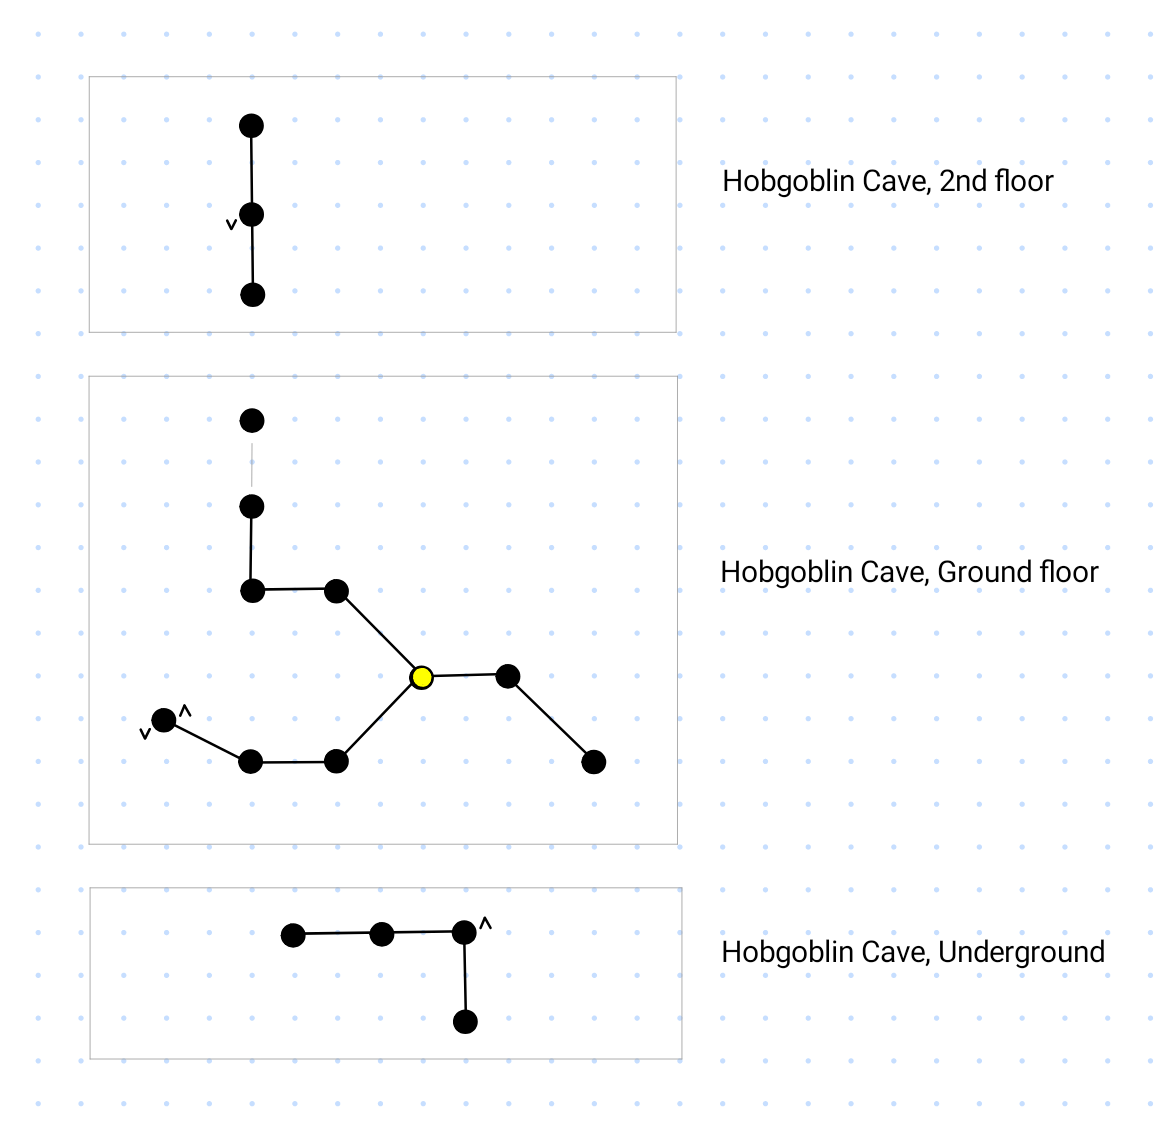 Map of the Hobgoblin Cave